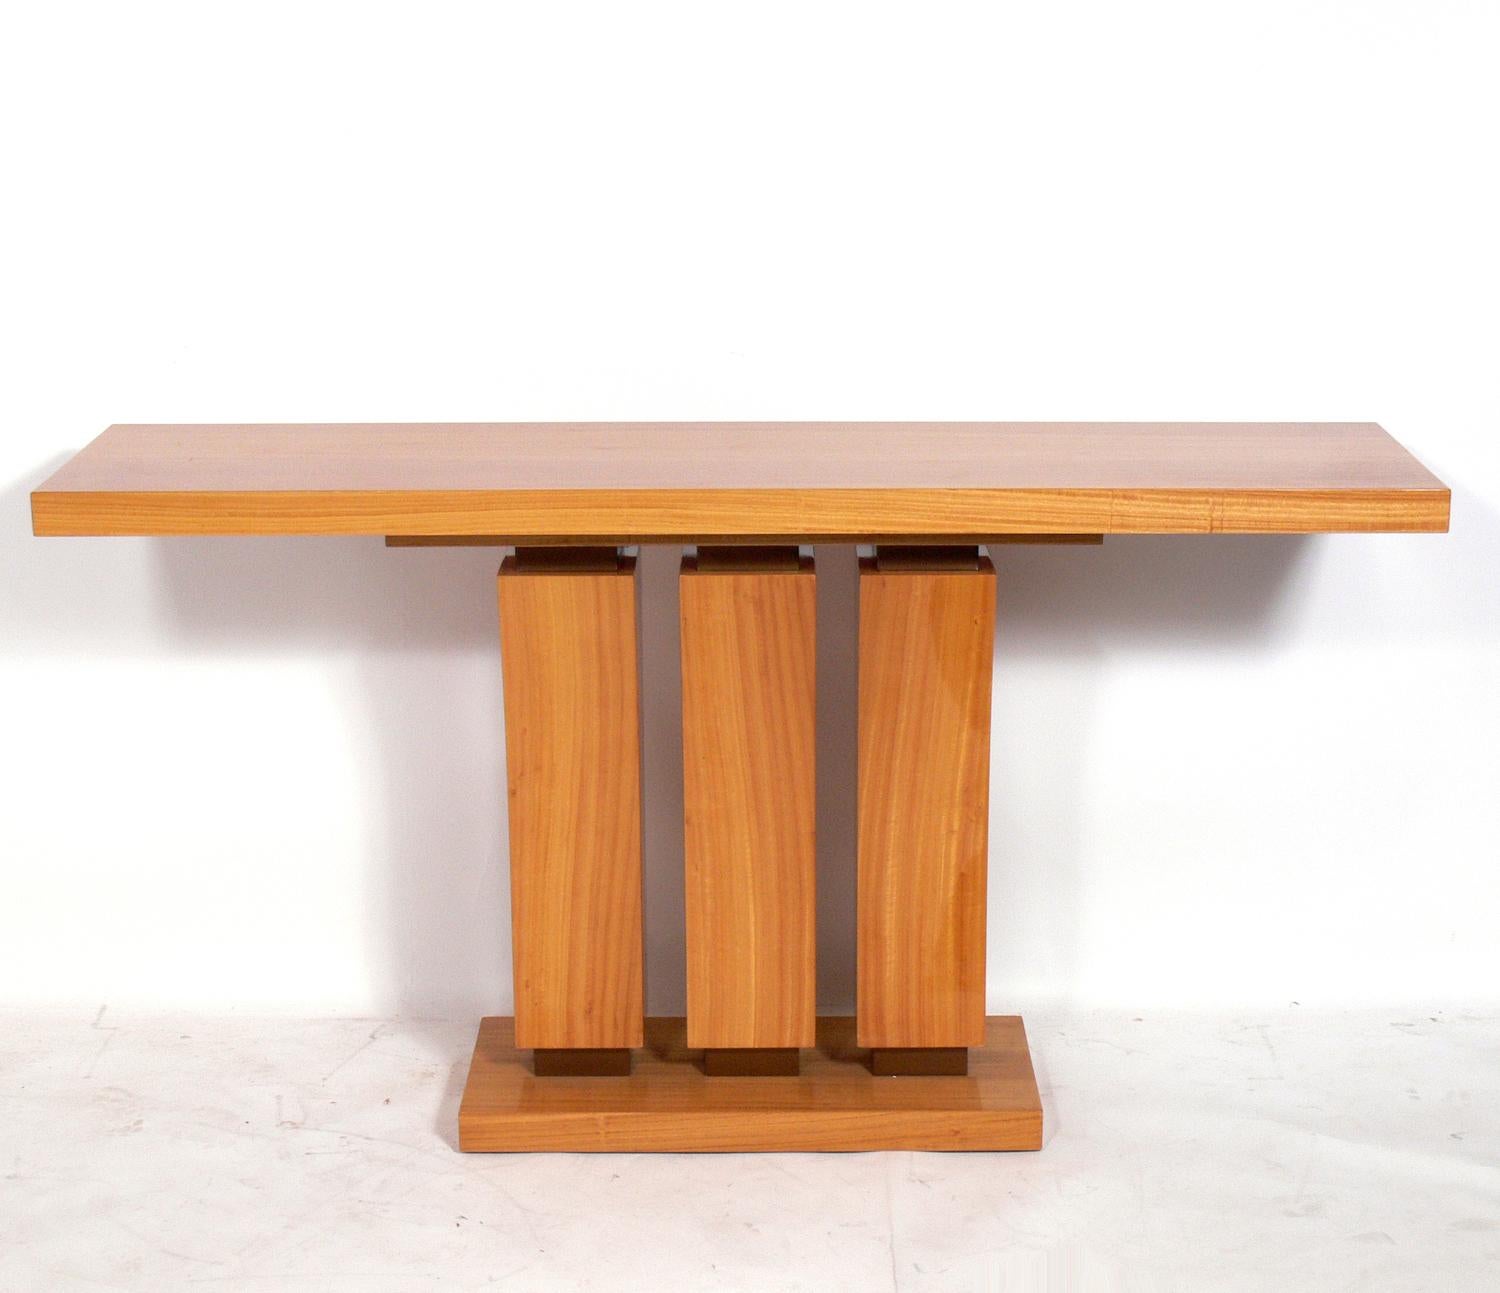 Satinwood console table, American, circa 1990s. This is based on a French Art Deco design from the 1930s. Beautiful graining to the satinwood. It is a versatile size and can be used as a console table, sofa table, or bar. We have a pair available.